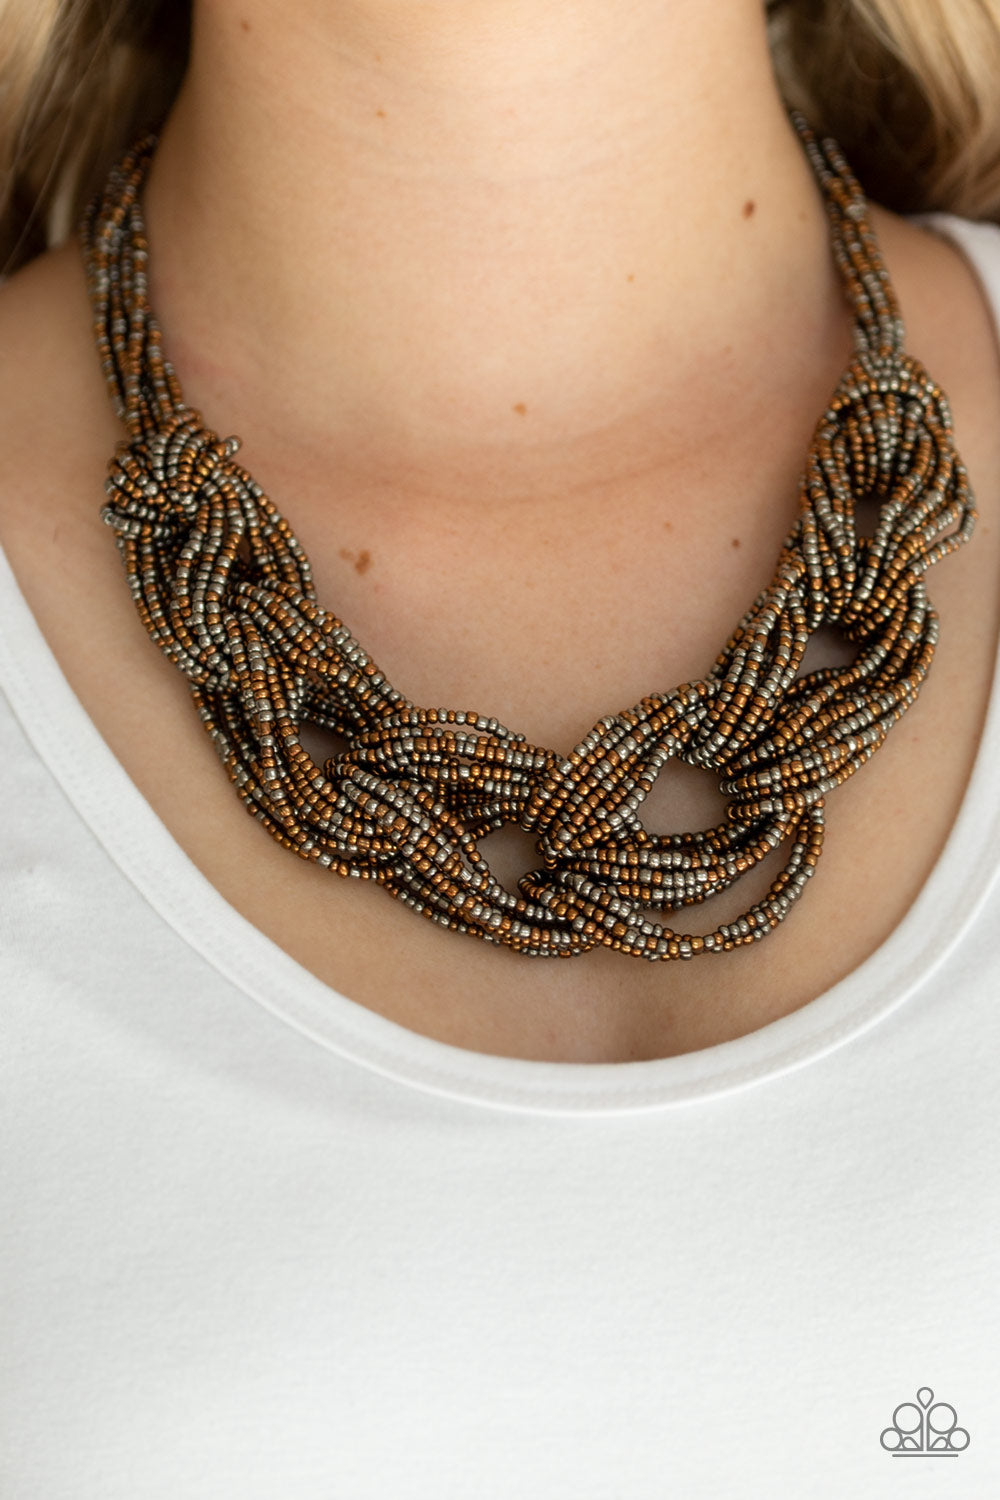 Paparazzi Necklace ~ City Catwalk - Copper Seed Beads Necklace